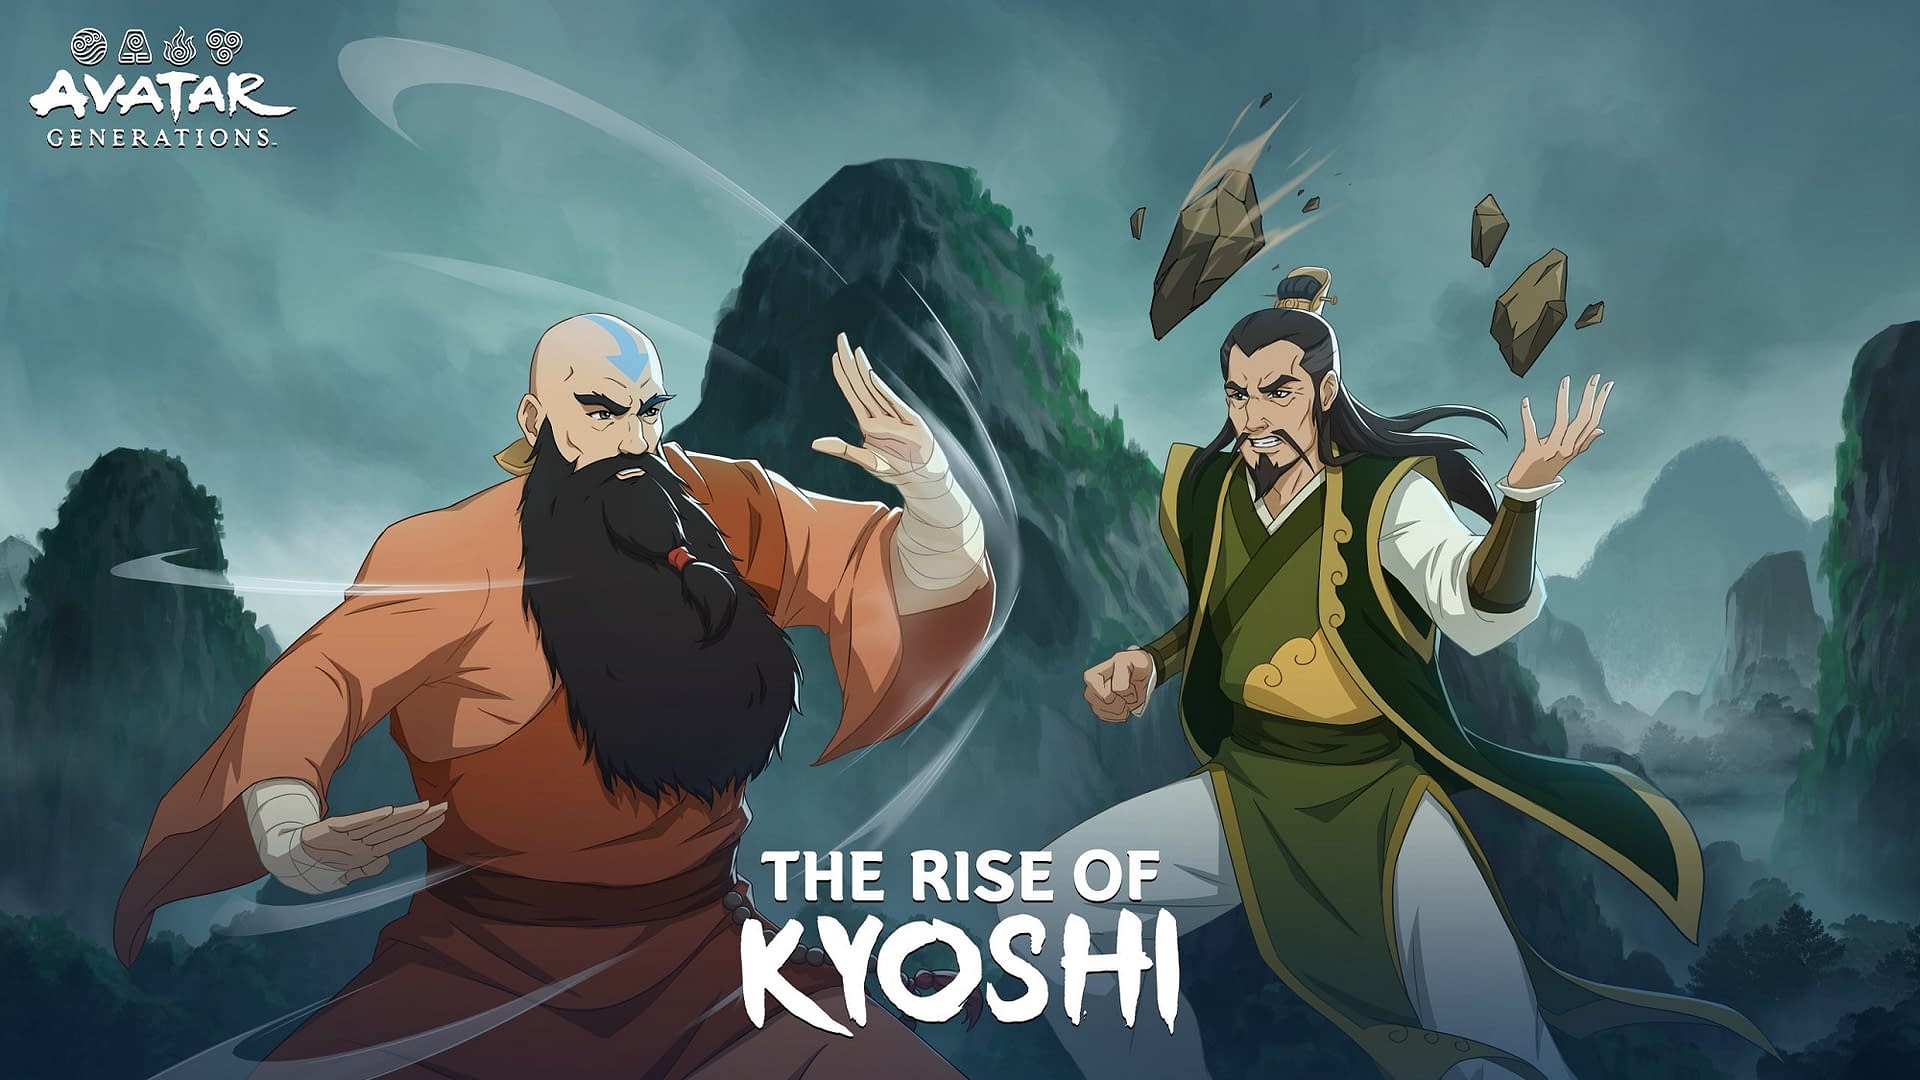 How An Avatar: The Last Airbender Game Could Utilize All Four Kingdoms